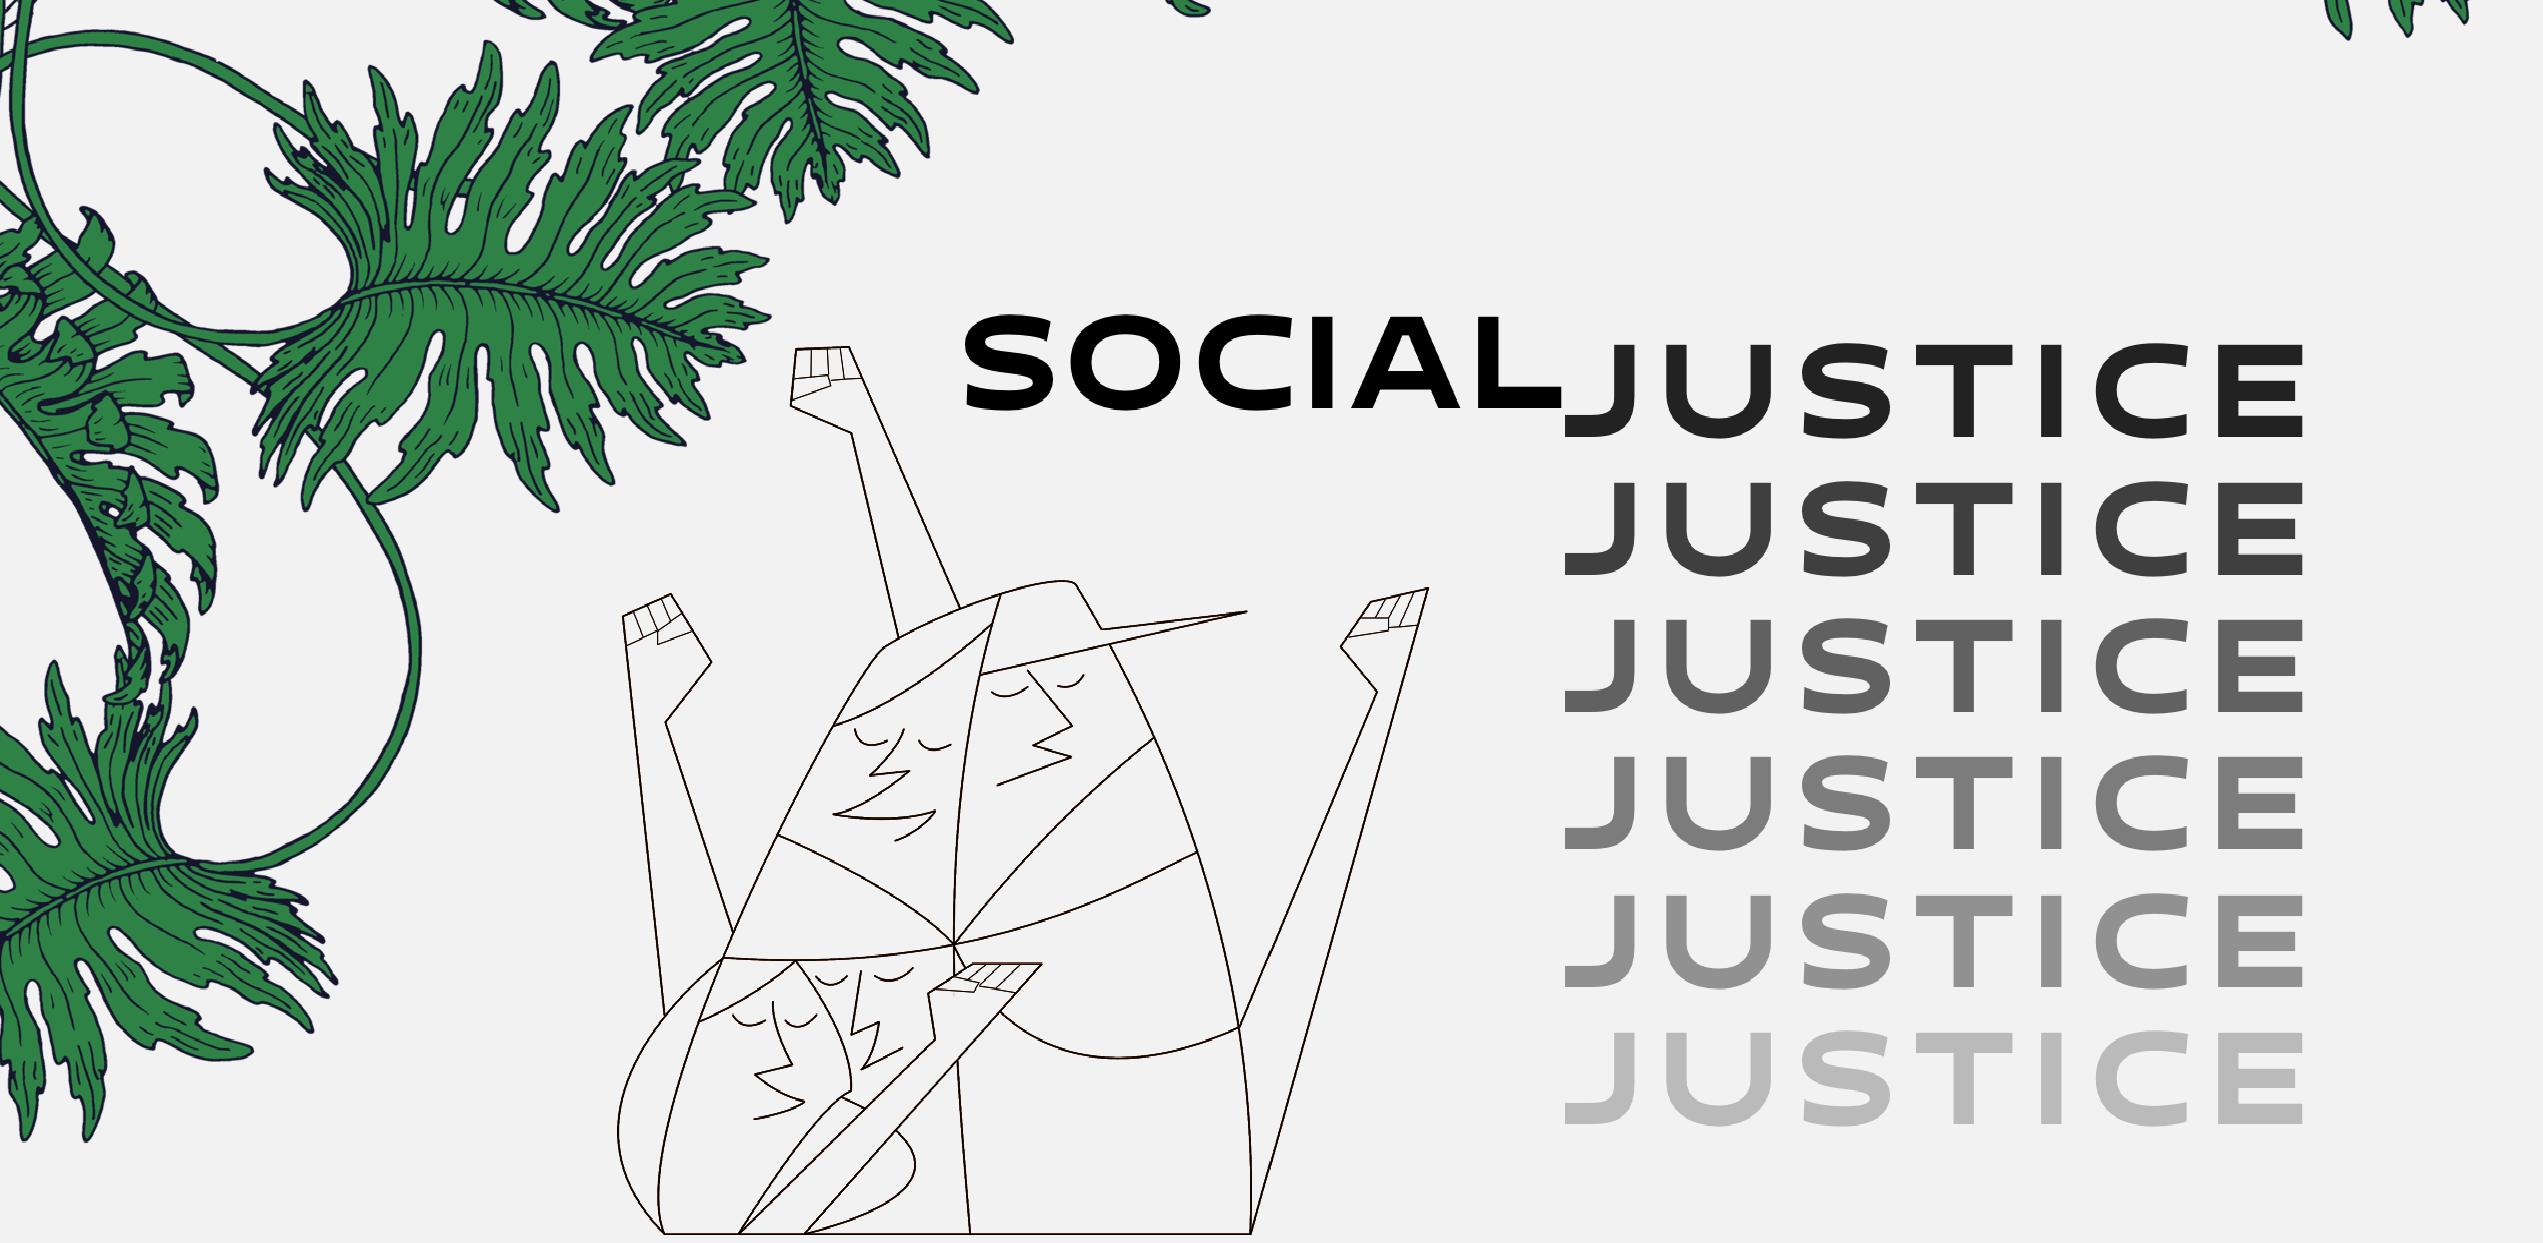 SOCIAL JUSTICE small_withQRs forNewsletter_onlinemedia-01